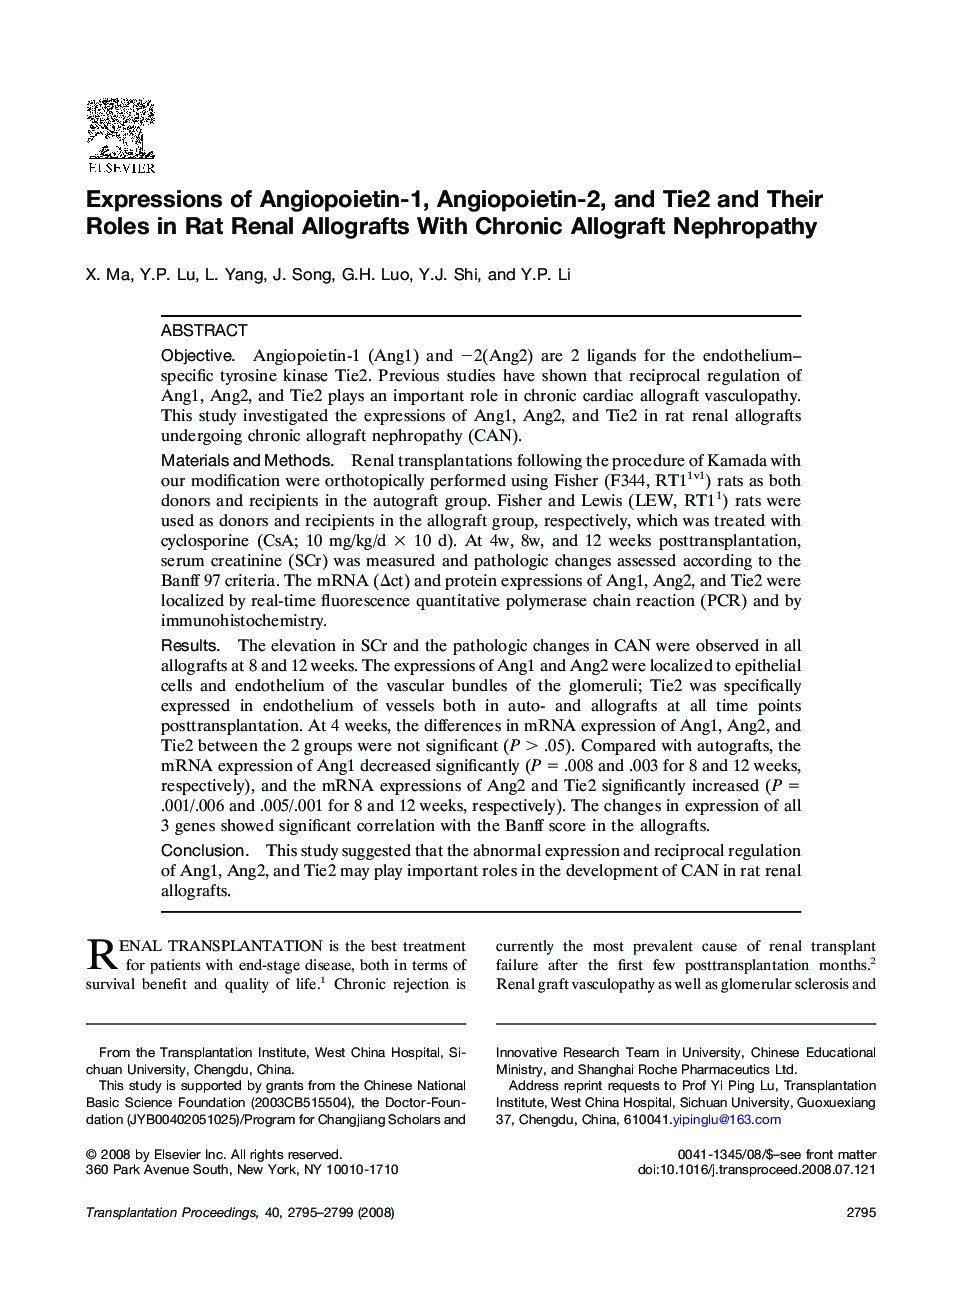 Expressions of Angiopoietin-1, Angiopoietin-2, and Tie2 and Their Roles in Rat Renal Allografts With Chronic Allograft Nephropathy 